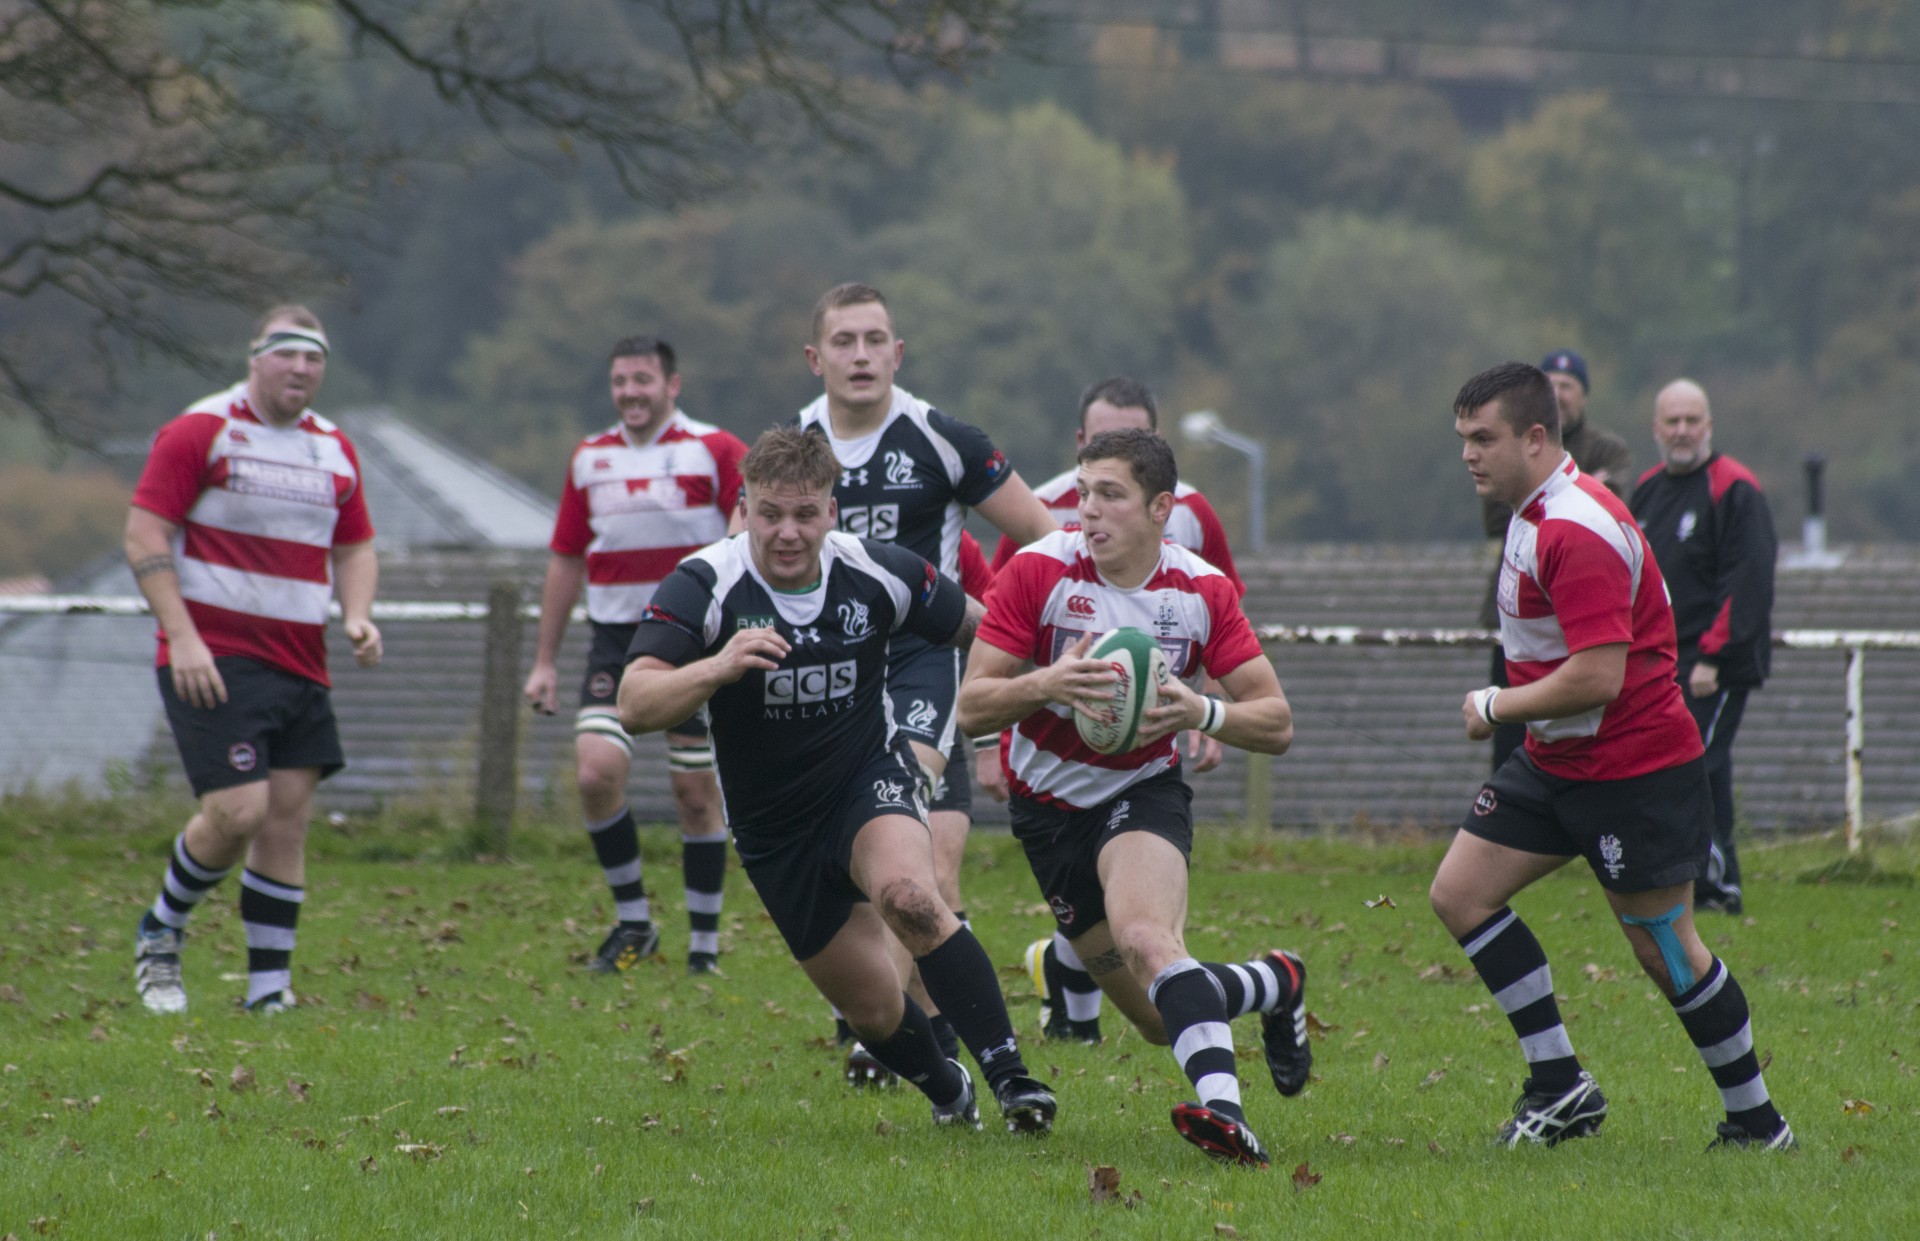 rugby football sport free photo